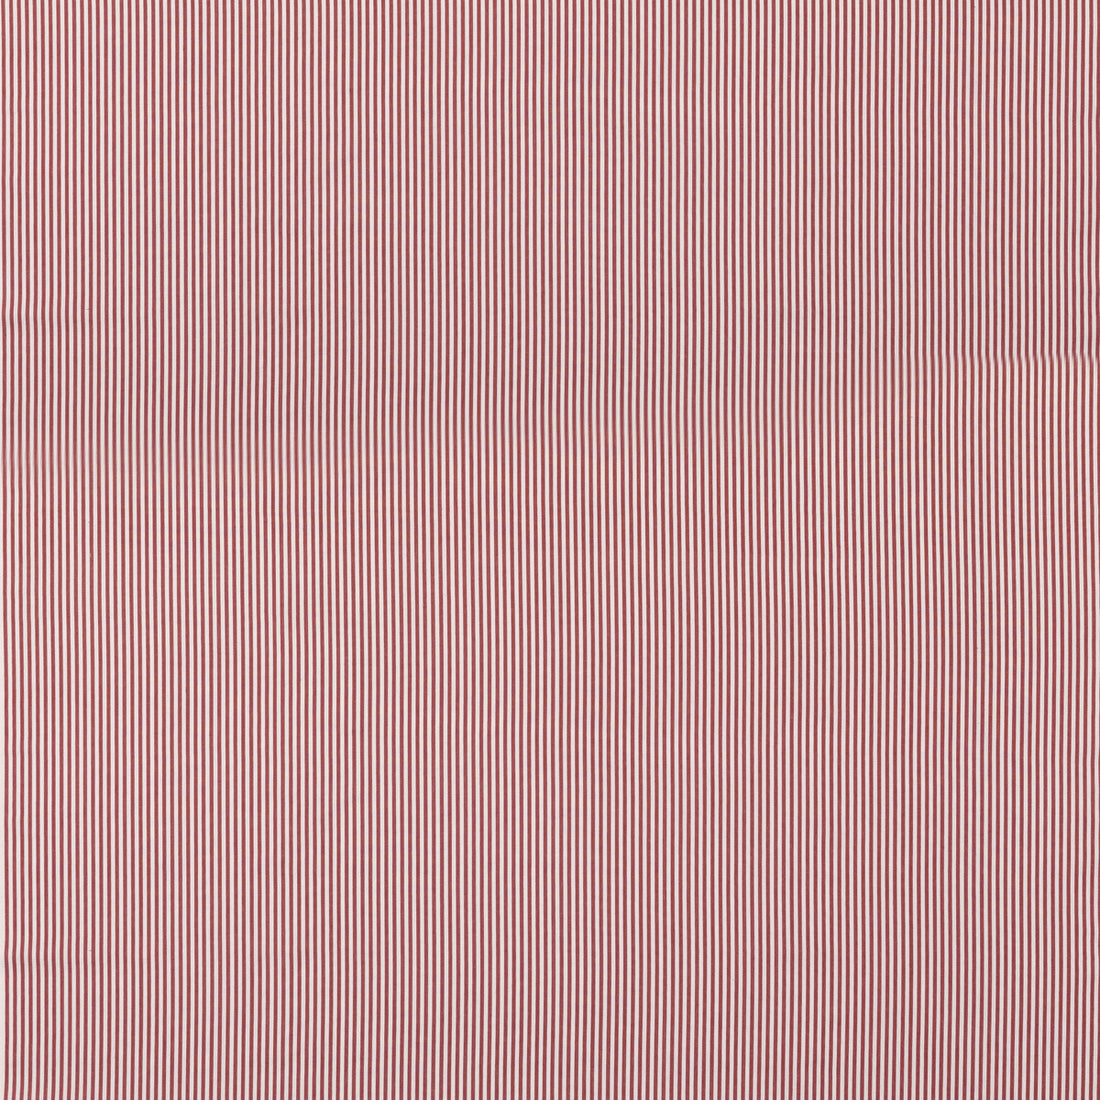 Mulberry Ticking fabric in red color - pattern FD813.V106.0 - by Mulberry in the Westerly Stripes collection